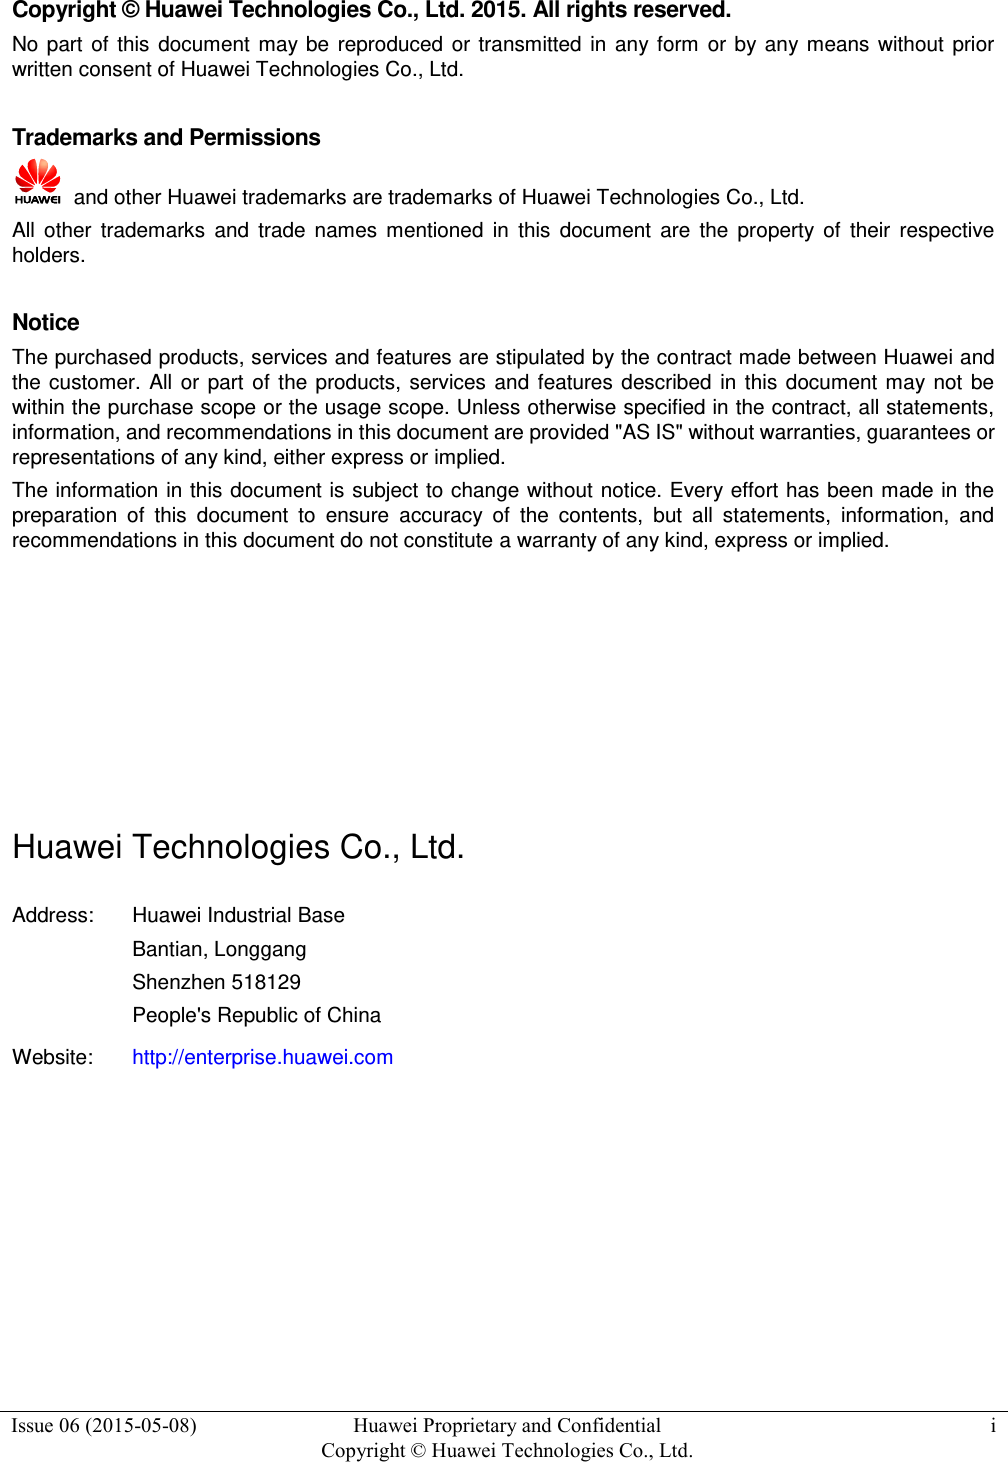  Issue 06 (2015-05-08) Huawei Proprietary and Confidential           Copyright © Huawei Technologies Co., Ltd. i  Copyright © Huawei Technologies Co., Ltd. 2015. All rights reserved. No part of this  document may be reproduced or transmitted in any form or by any means without prior written consent of Huawei Technologies Co., Ltd.  Trademarks and Permissions   and other Huawei trademarks are trademarks of Huawei Technologies Co., Ltd. All  other  trademarks  and  trade names  mentioned  in  this document  are  the property of  their  respective holders.  Notice The purchased products, services and features are stipulated by the contract made between Huawei and the customer.  All or  part of the products, services and features described in this document may not be within the purchase scope or the usage scope. Unless otherwise specified in the contract, all statements, information, and recommendations in this document are provided &quot;AS IS&quot; without warranties, guarantees or representations of any kind, either express or implied. The information in this document is subject to change without notice. Every effort has been made in the preparation  of  this  document  to  ensure  accuracy  of  the  contents,  but  all  statements,  information,  and recommendations in this document do not constitute a warranty of any kind, express or implied.       Huawei Technologies Co., Ltd. Address: Huawei Industrial Base Bantian, Longgang Shenzhen 518129 People&apos;s Republic of China Website: http://enterprise.huawei.com    